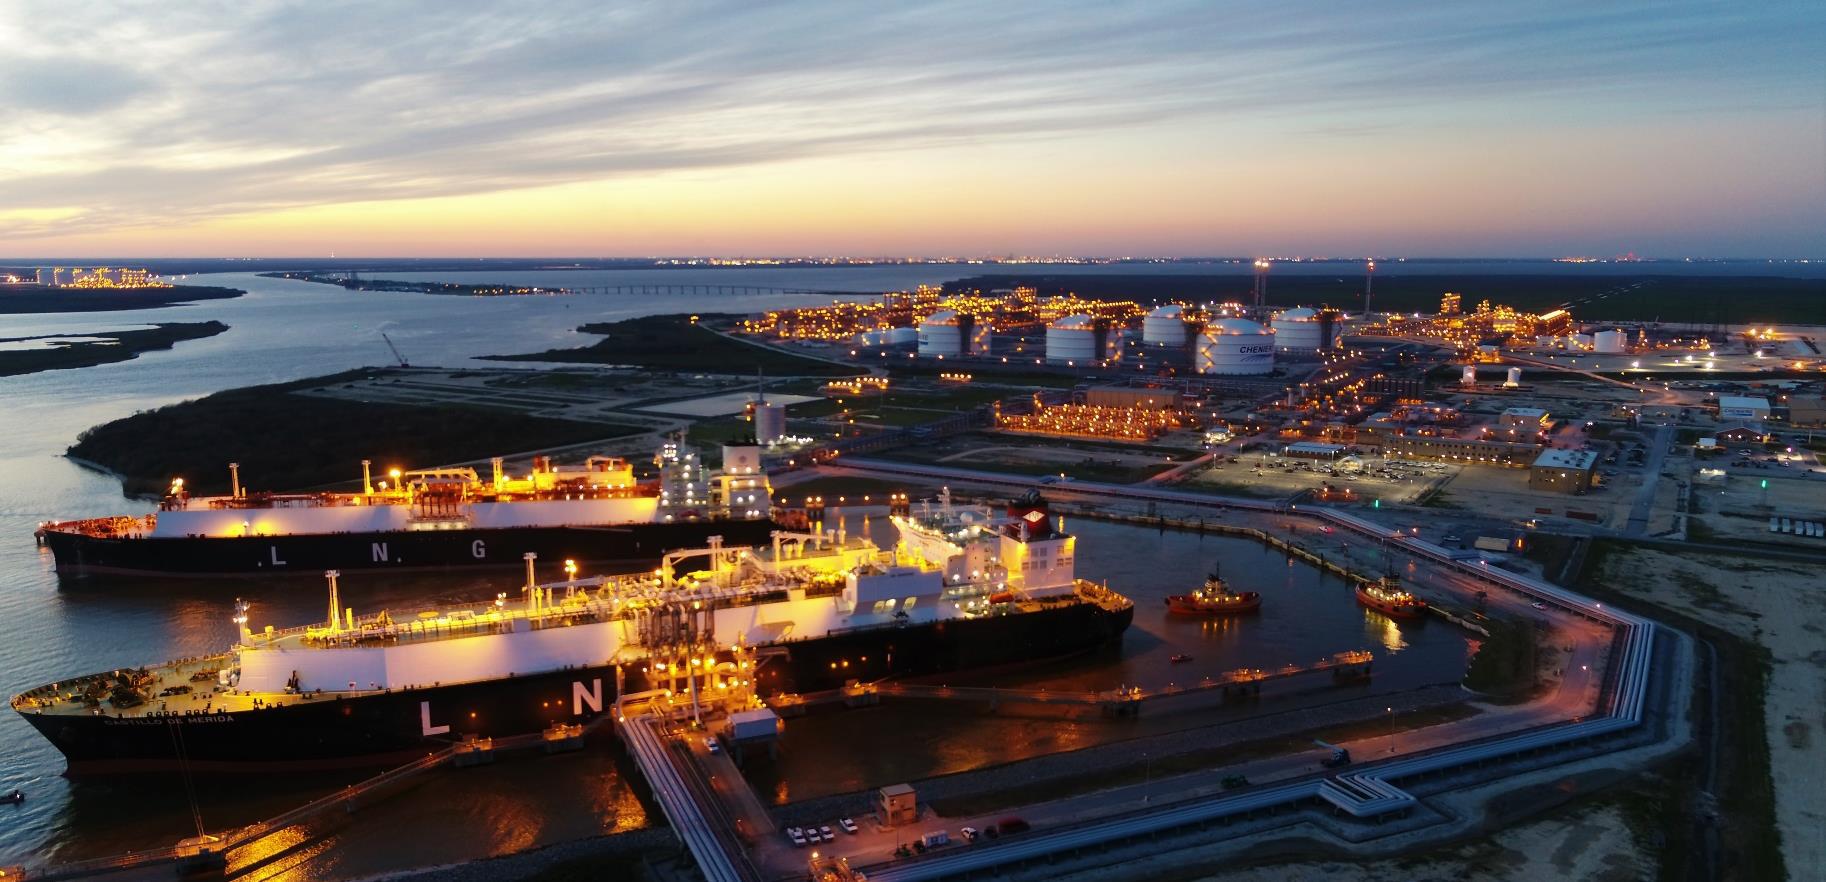 Cheniere delivers its first carbon-neutral LNG cargo to Shell